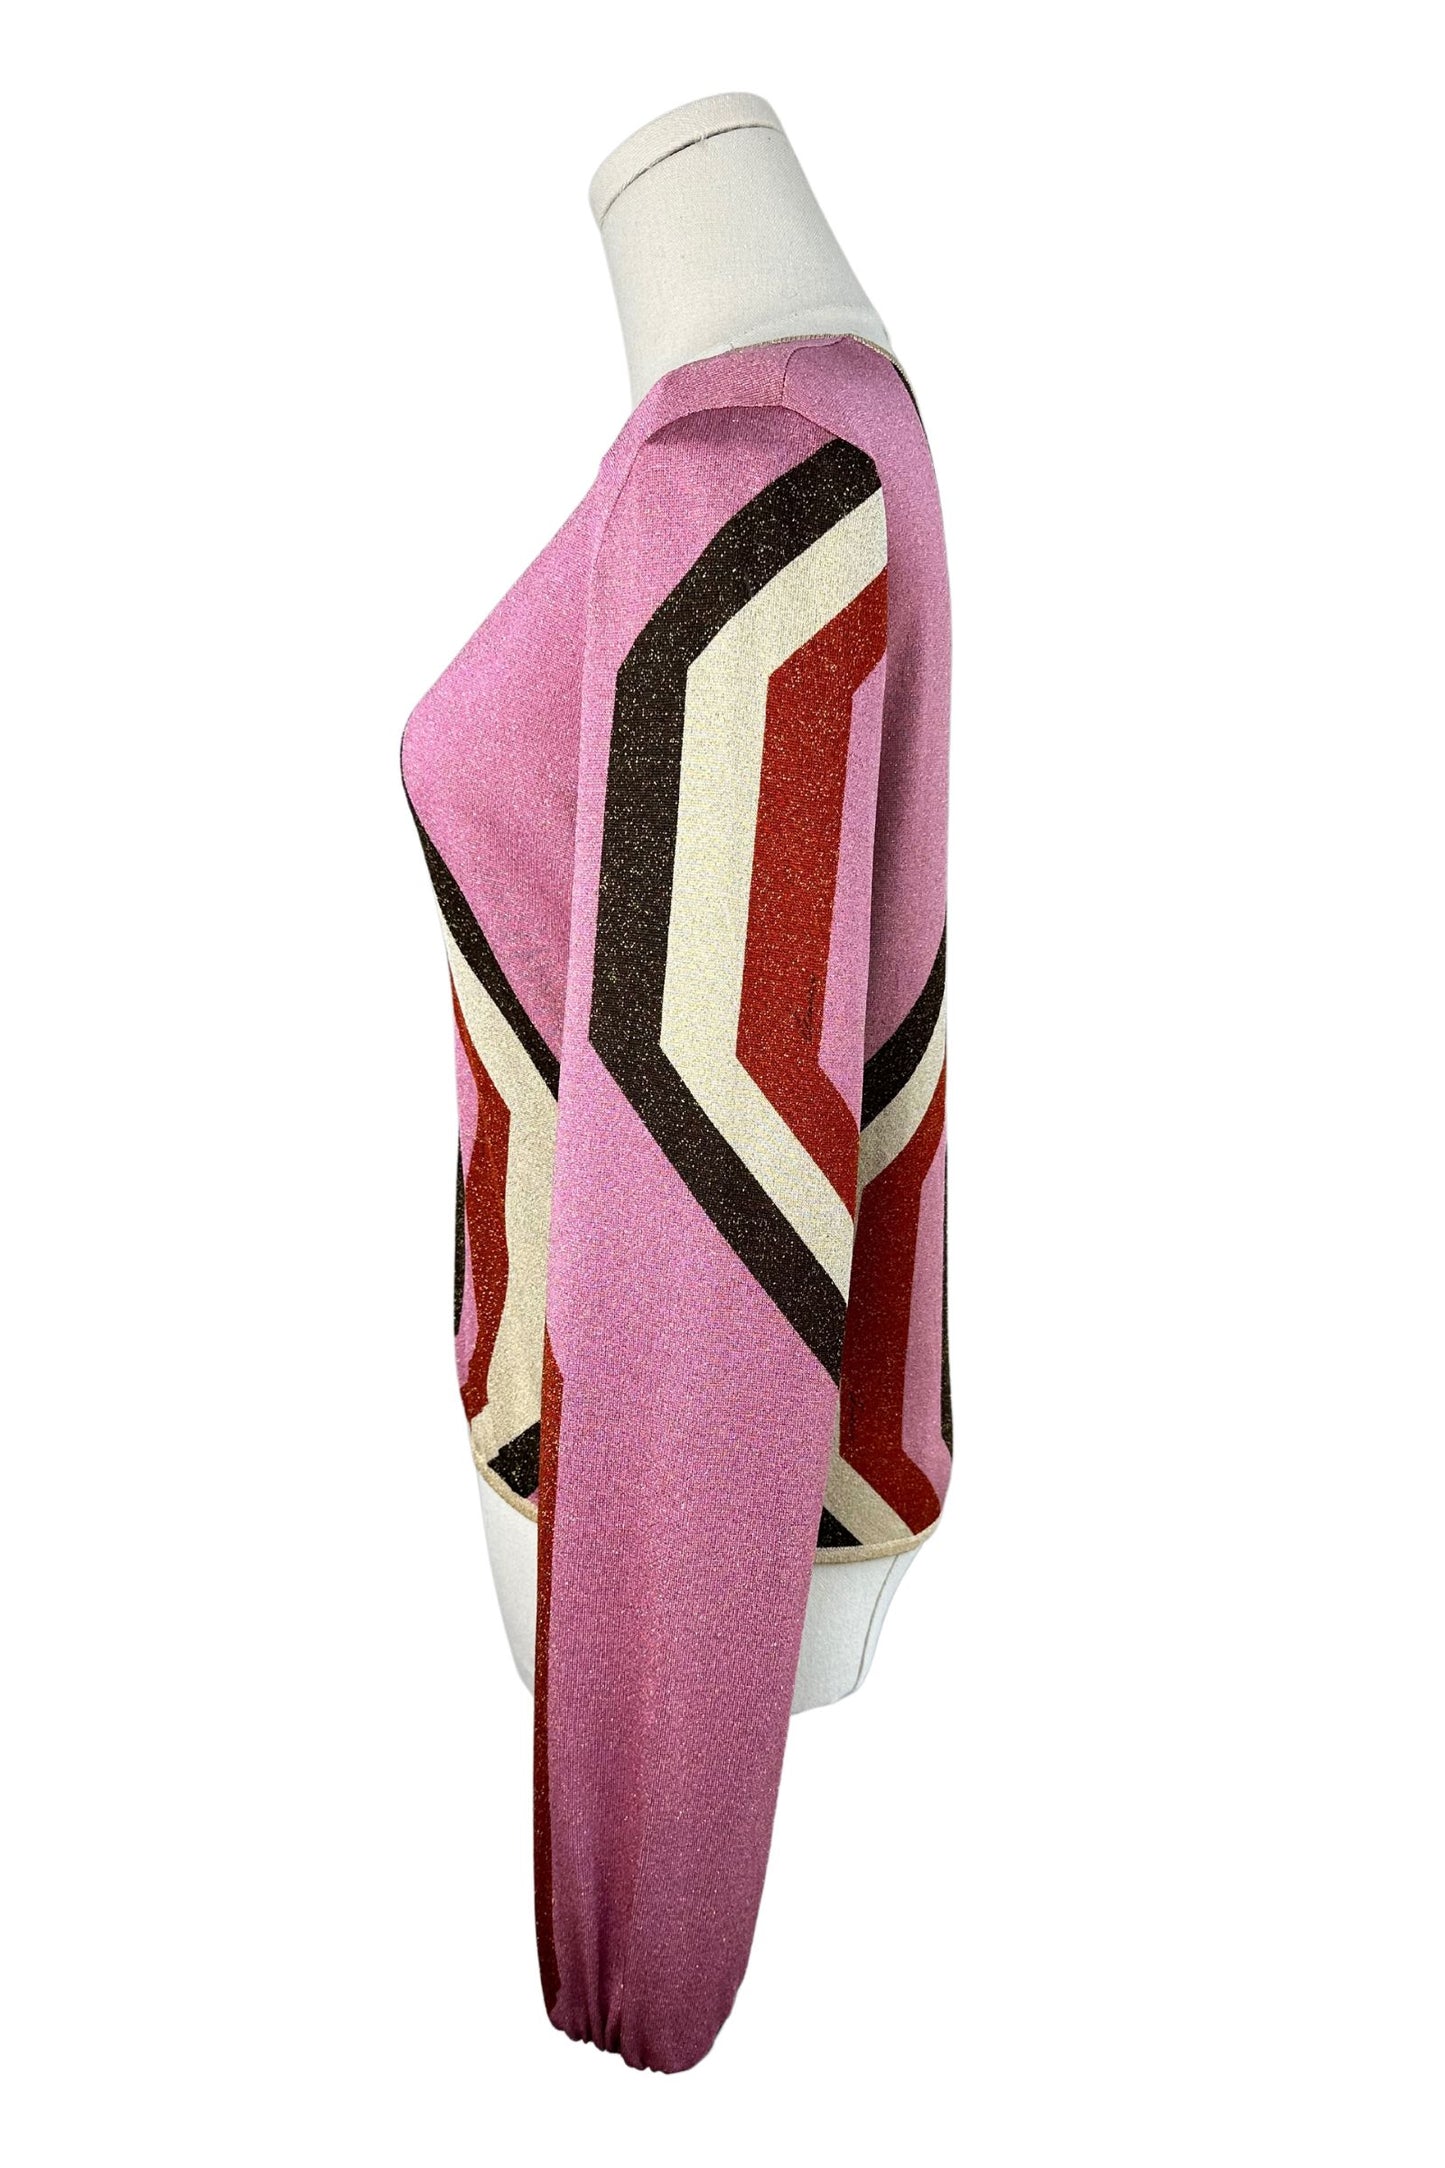 Gucci by Tom Ford F/W 2000 Collection Blush Toned Kaleidoscope Metallic Lurex Knit Tie Front Blouse Size Medium